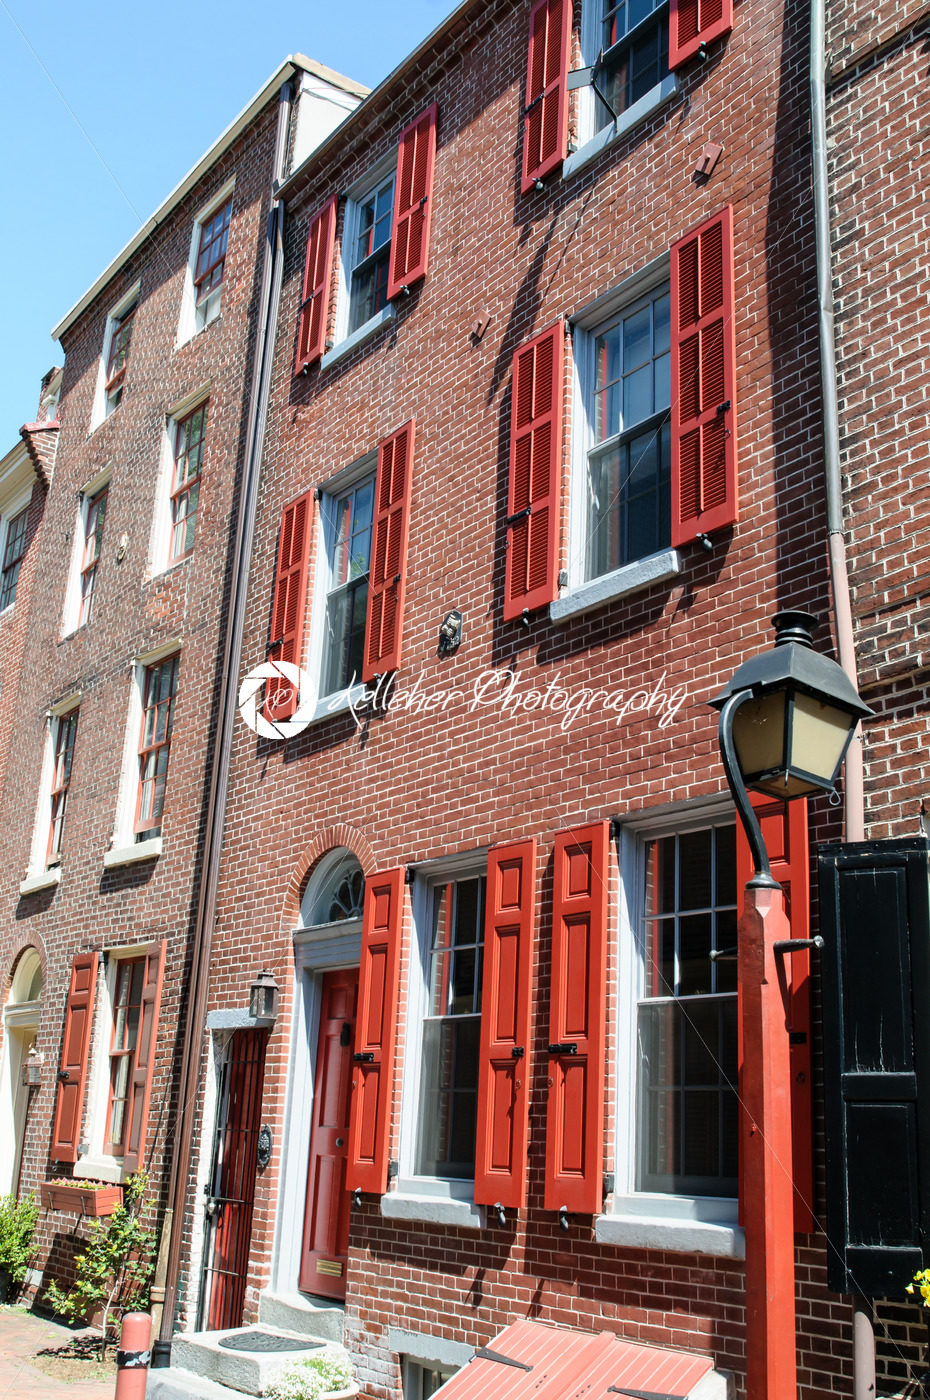 PHILADELPHIA, PA – MAY 14: The historic Old City in Philadelphia, Pennsylvania. Elfreth’s Alley, referred to as the nation’s oldest residential street, dating to 1702 on May 14, 2015 - Kelleher Photography Store